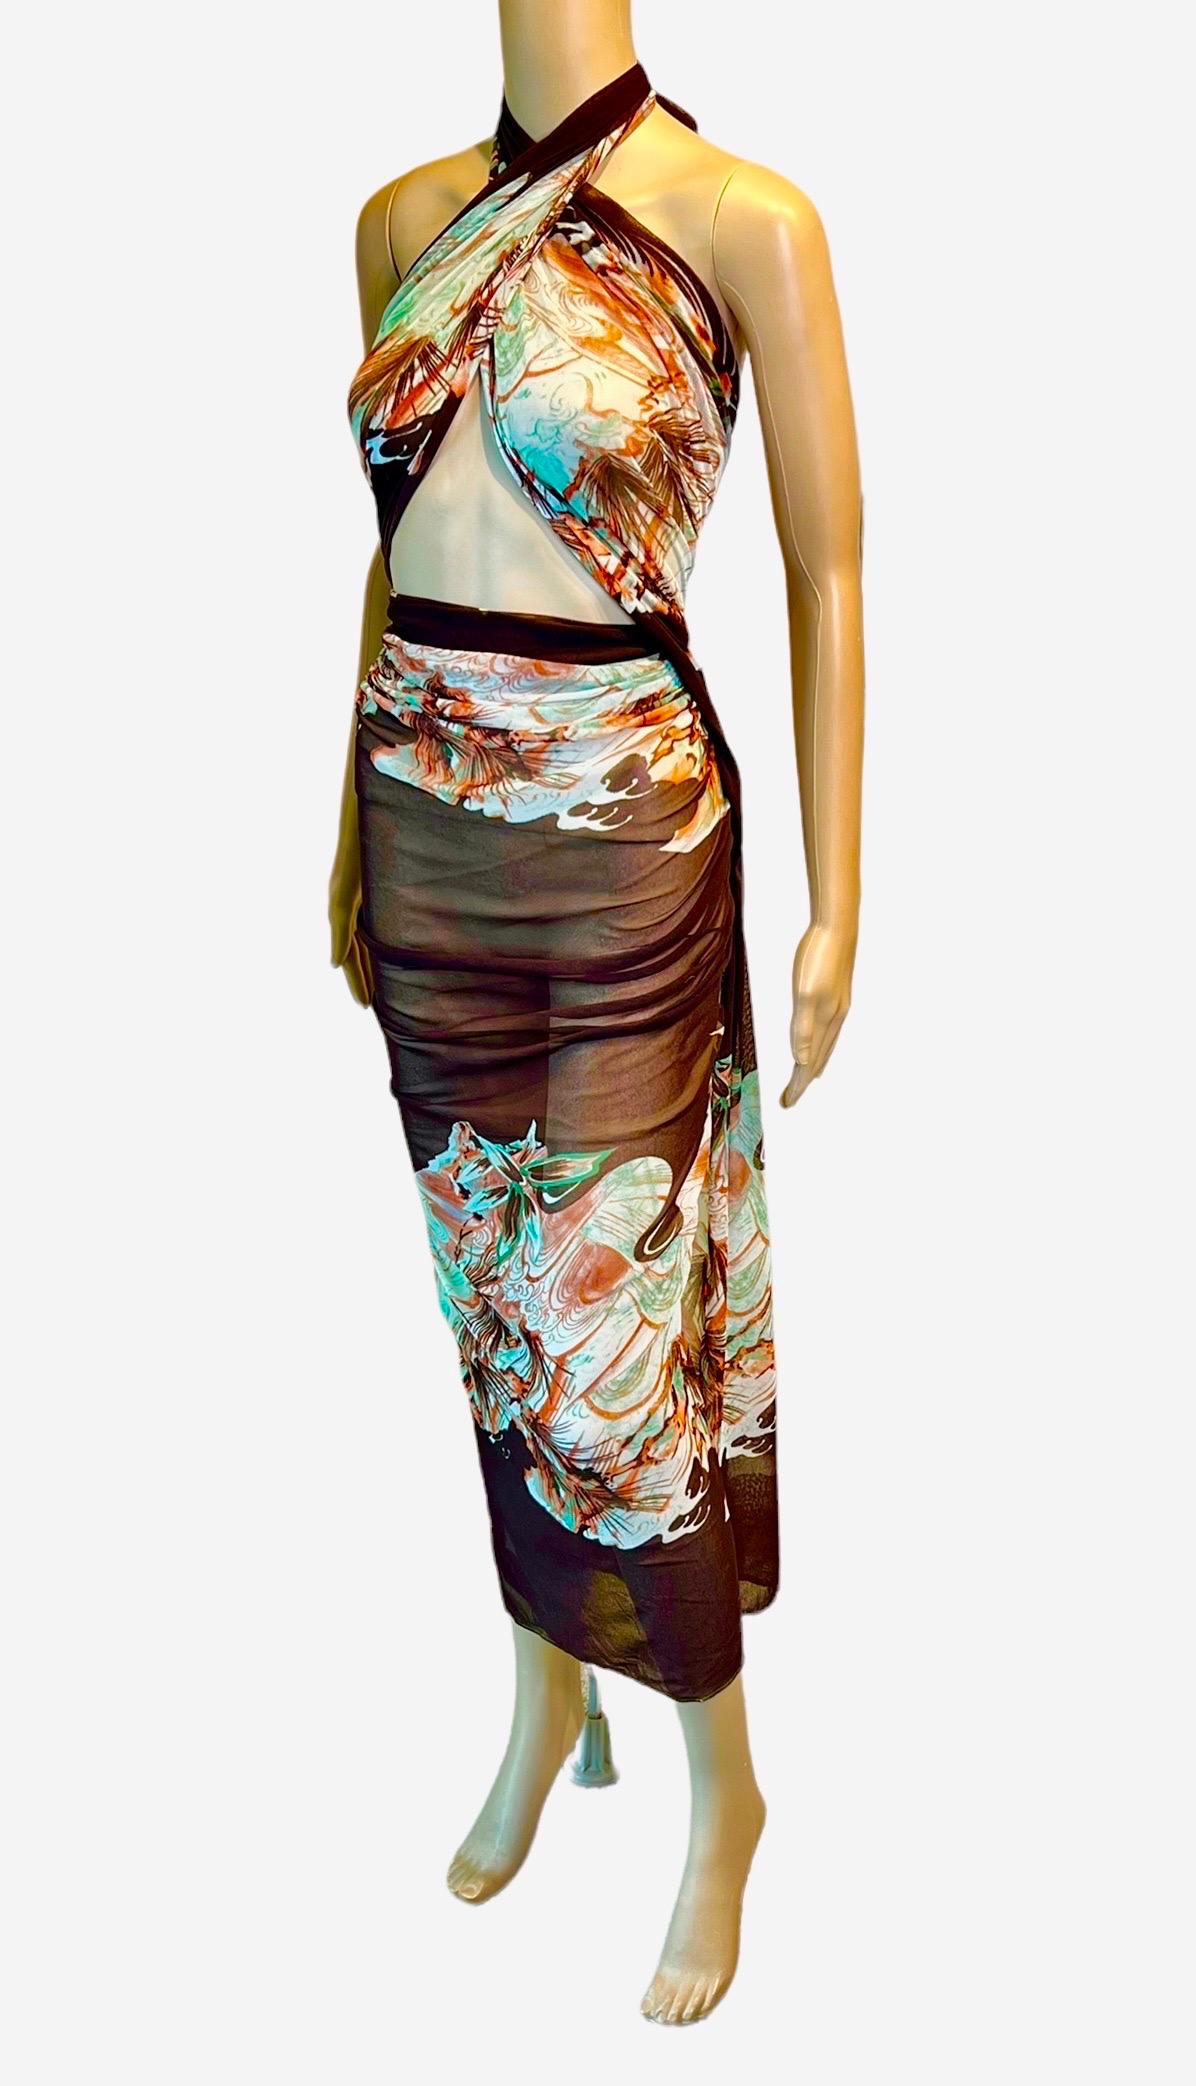 Jean Paul Gaultier Soleil Vintage Koi Fish Tattoo Print Mesh Wrap Dress Scarf Pareo

Please note this pareo is very versatile and can be styled multiple ways based on preference as seen in photos.

